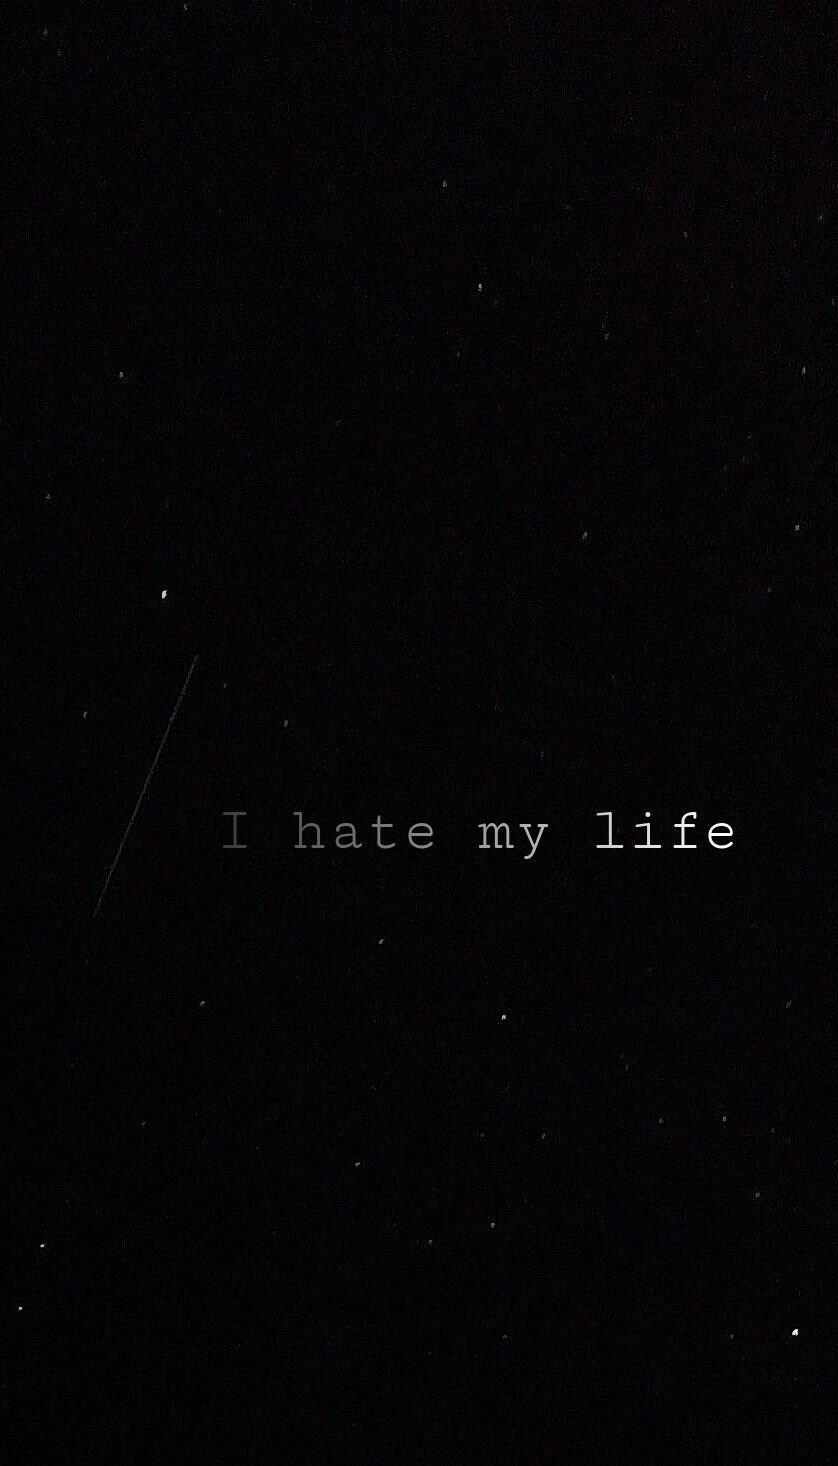 I Hate My Life 240x320 Mobile Wallpaper  Mobile Wallpapers  Download Free  Android iPhone Samsung HD Backgrounds